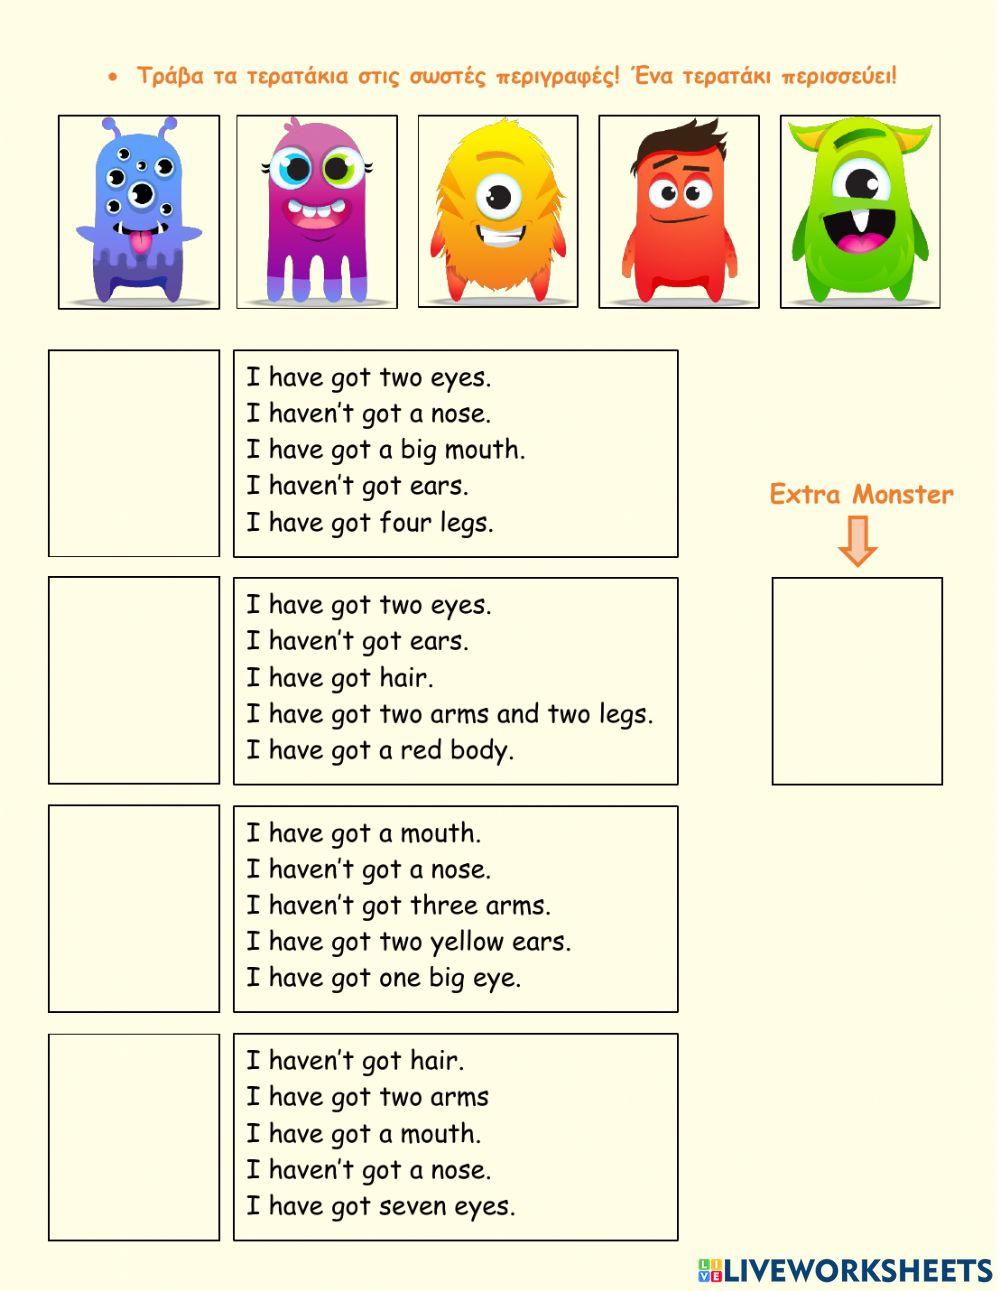 Elementary 1 - Which monster am I?